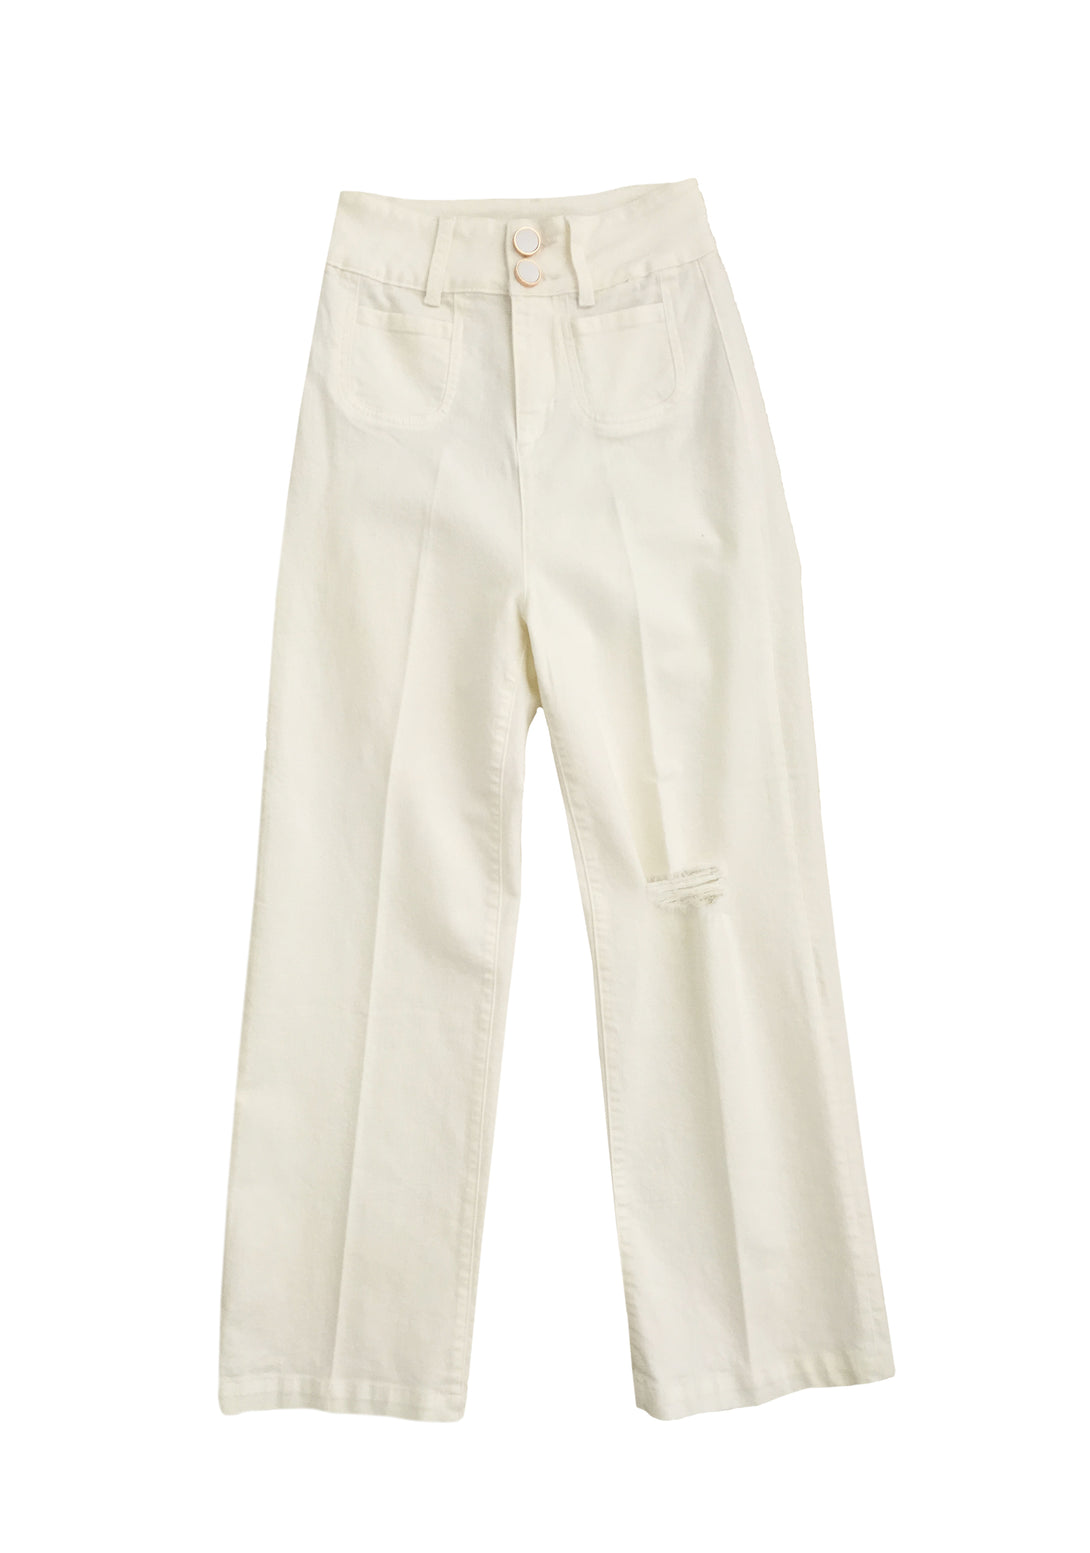 Culotte pant cropped fit made in gabardine fabric with rips Fracomina F321SVC001D40101-278